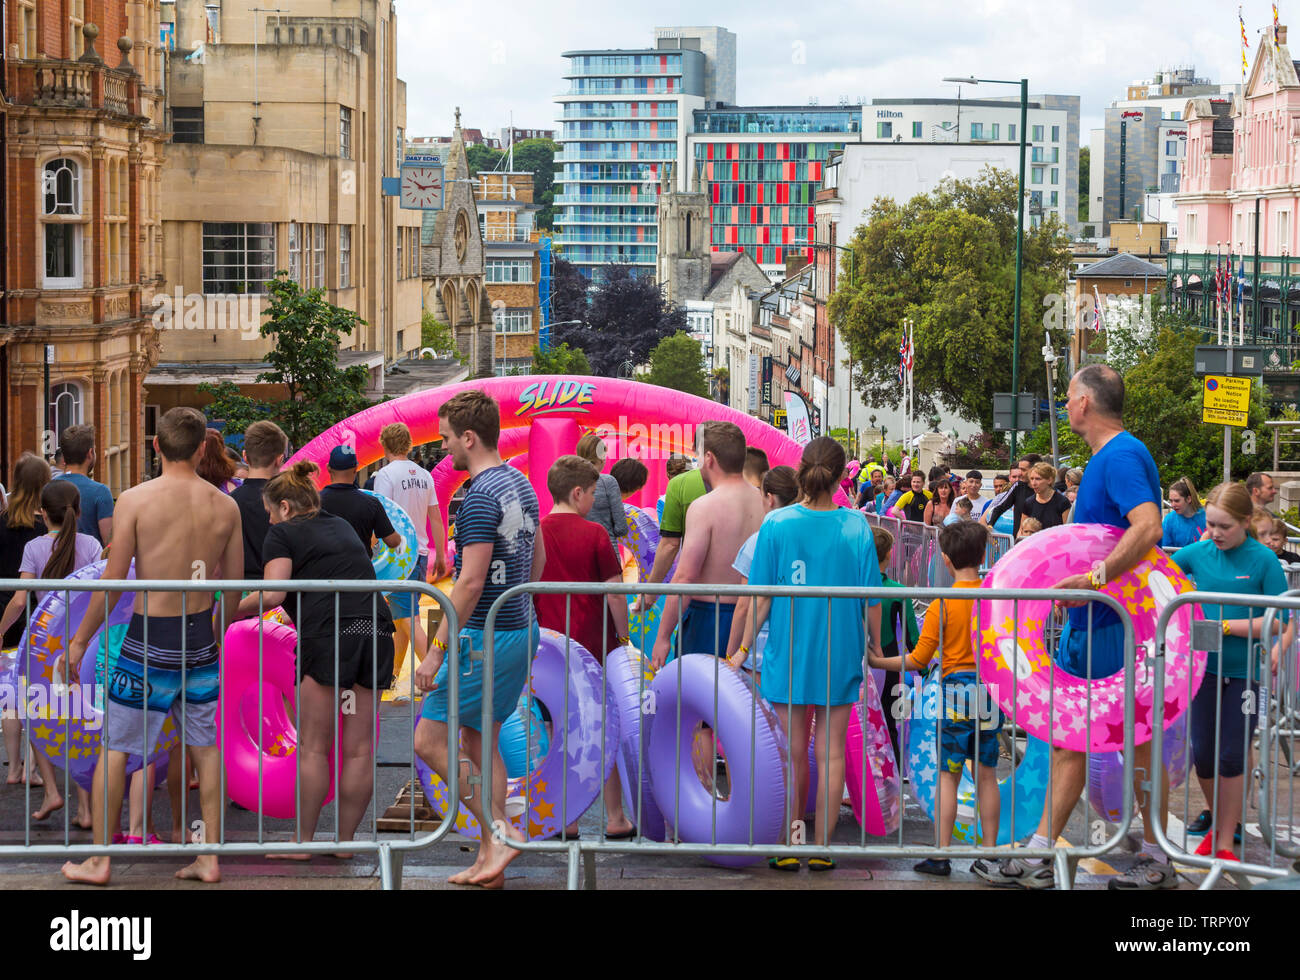 queuing at the top to have a go on giant waterslide, water slide, at Bournemouth, Dorset UK in June Stock Photo